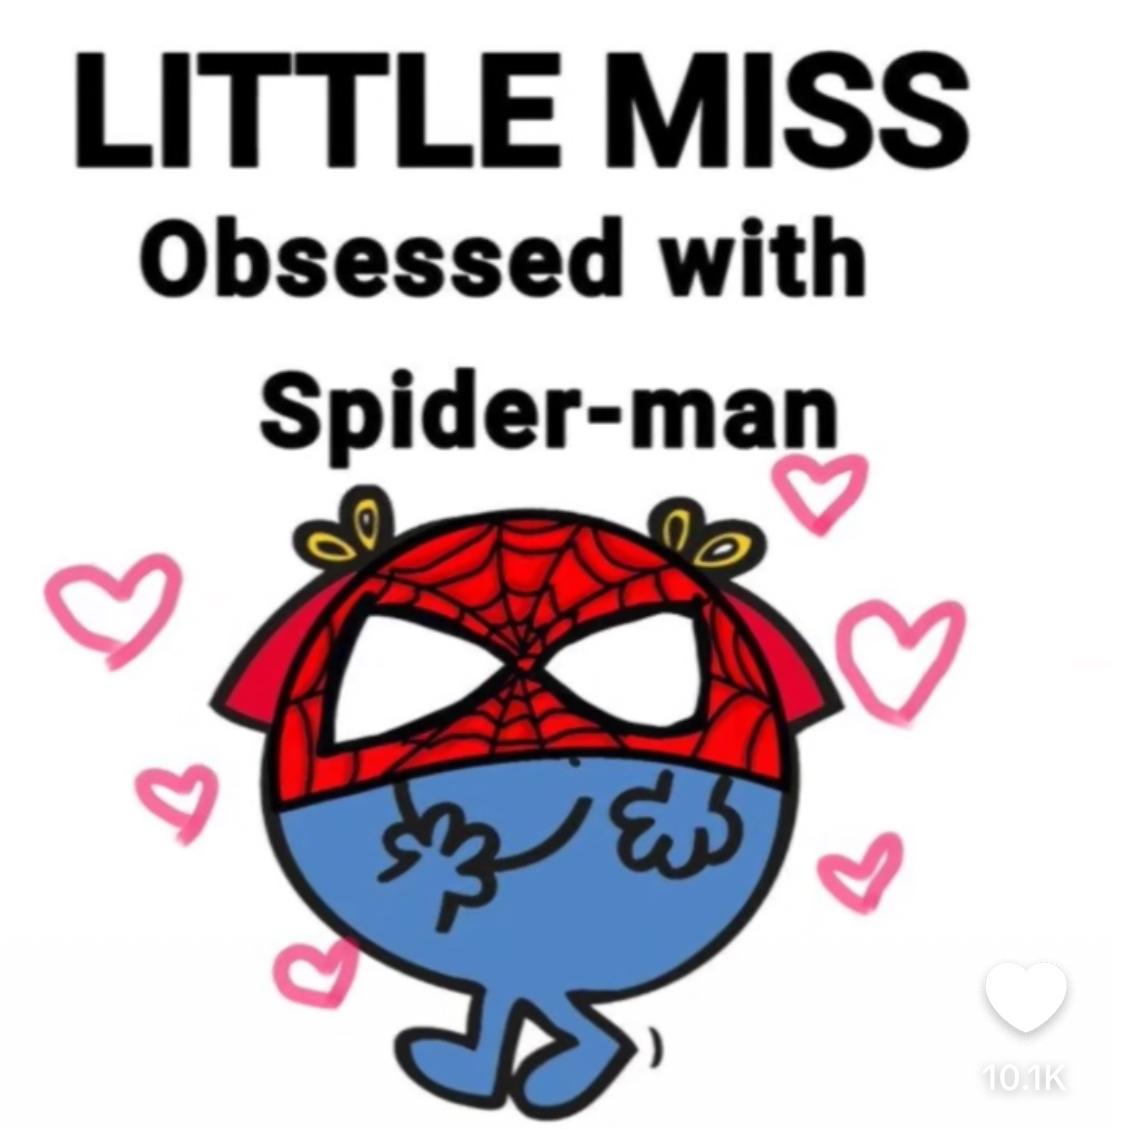 Spider girly's images